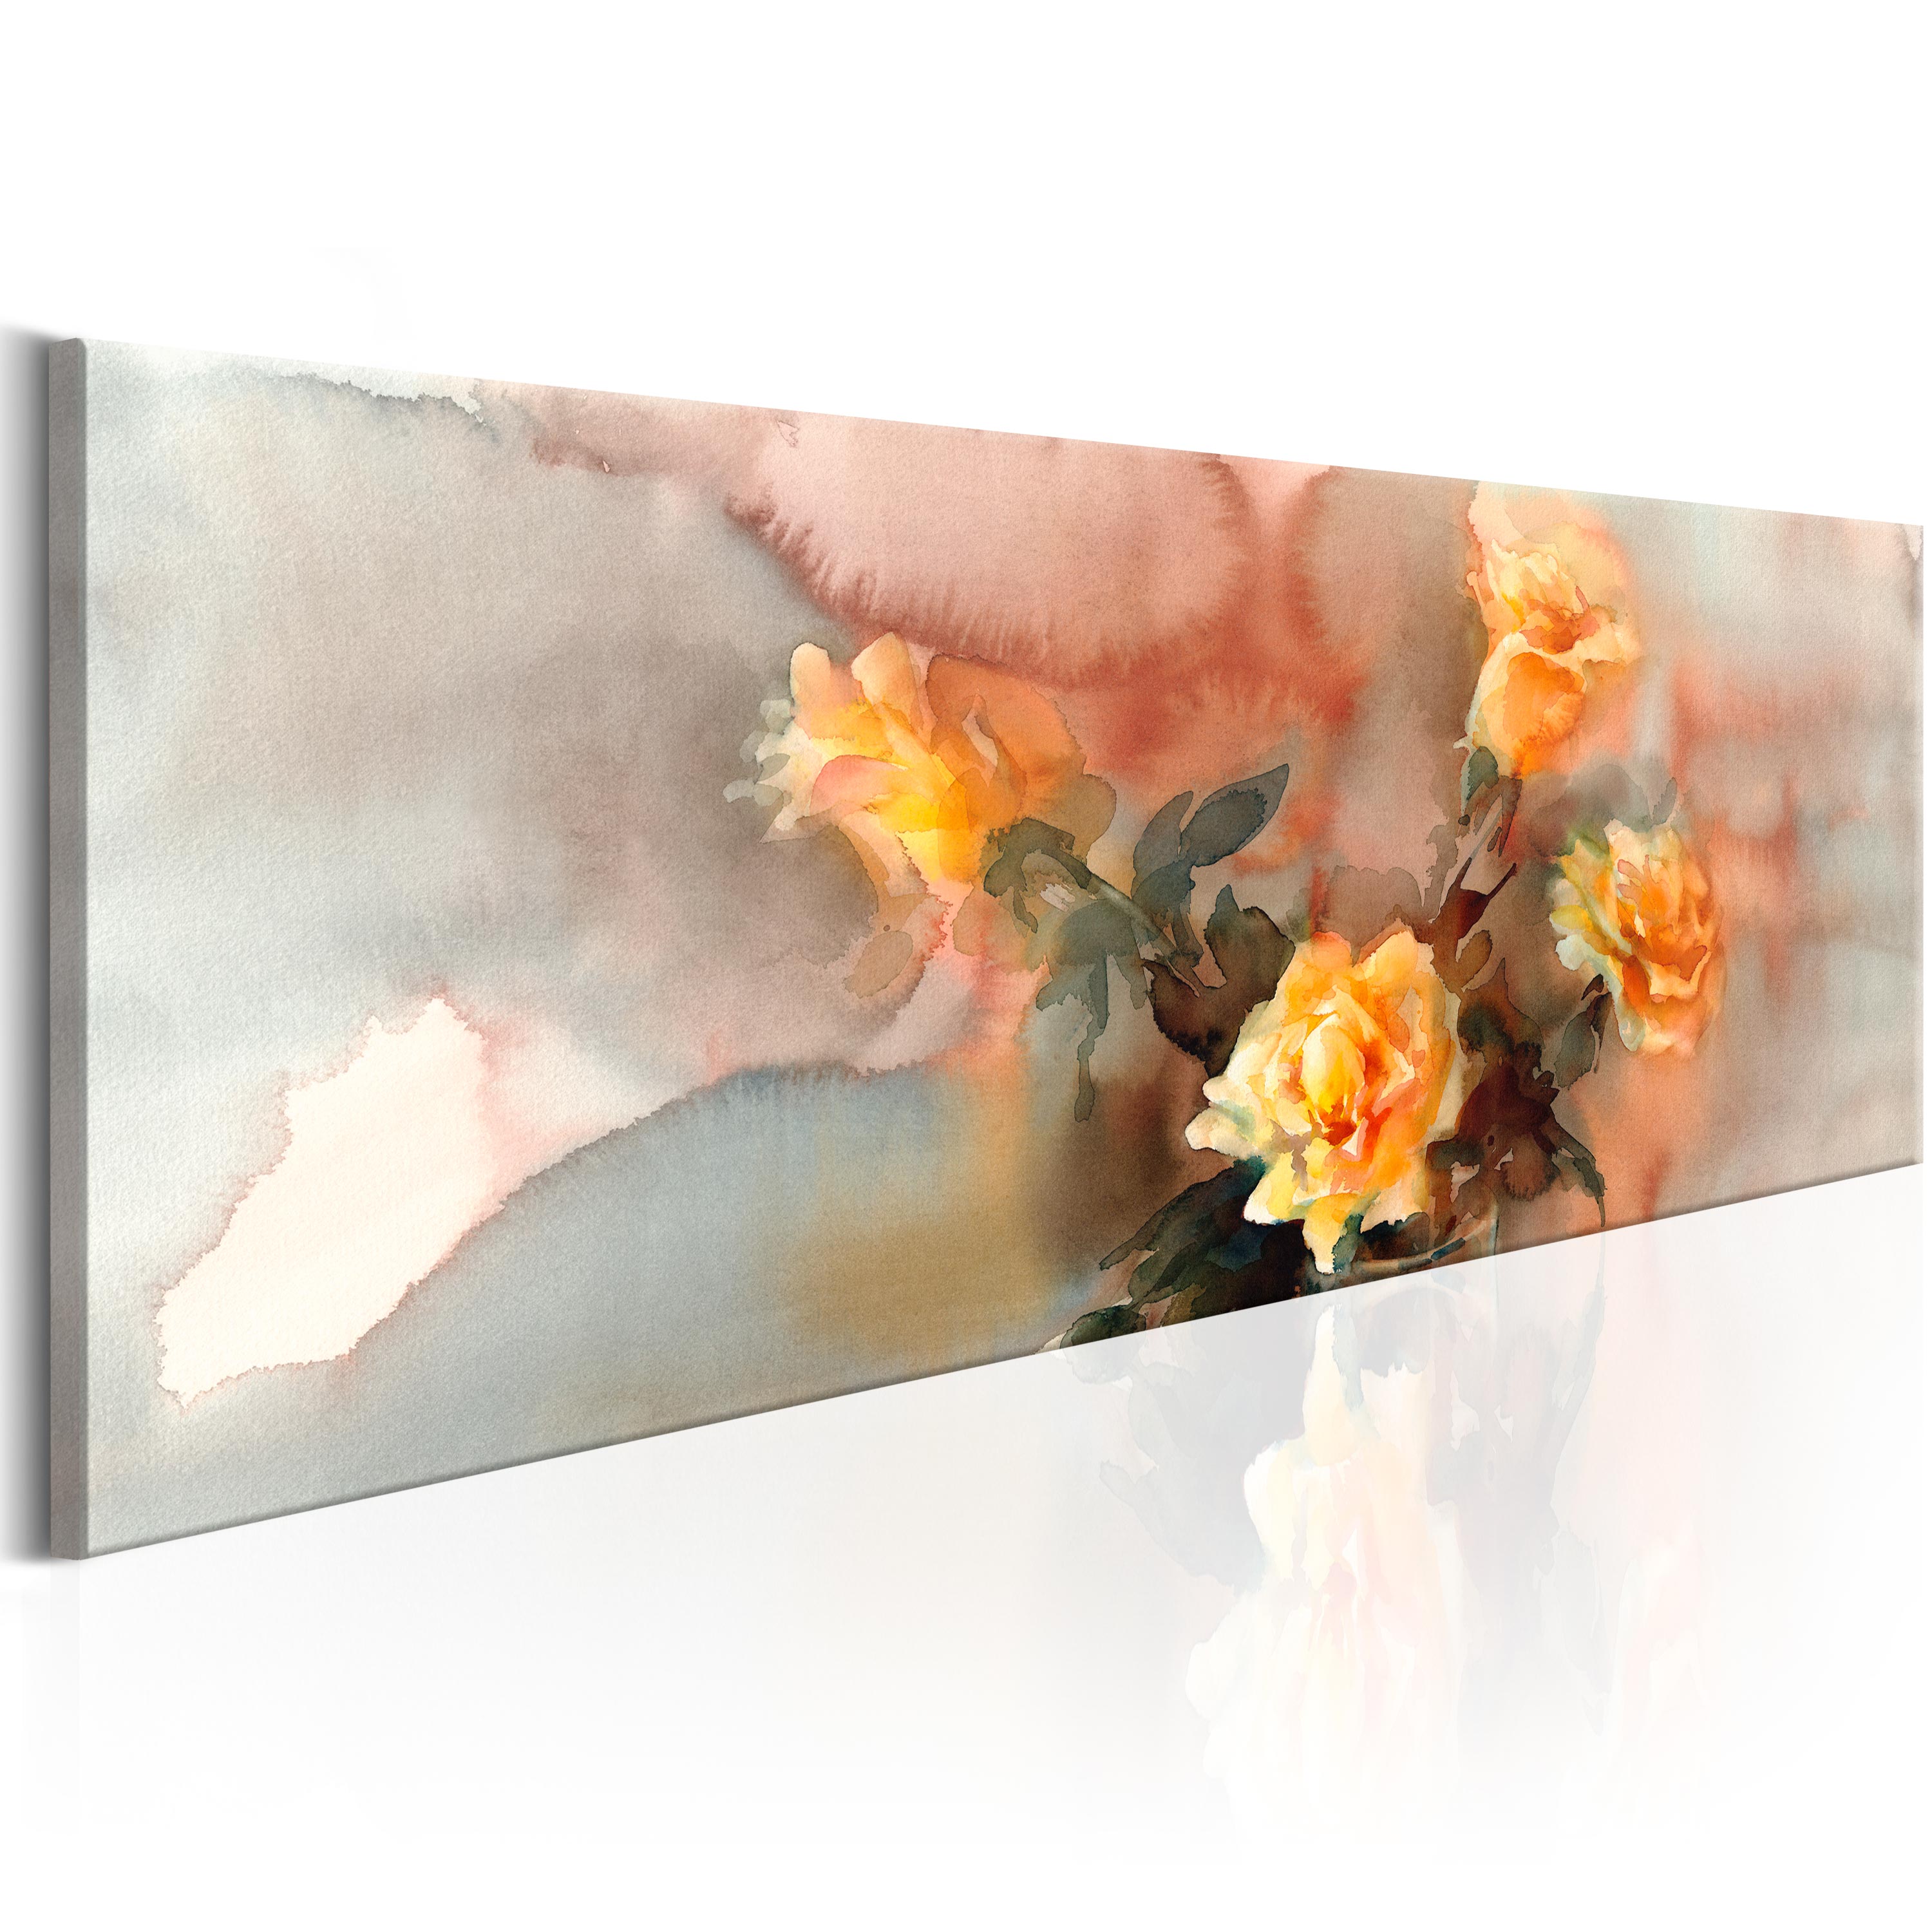 Canvas Print - Bouquet of Yellow Roses - 120x40